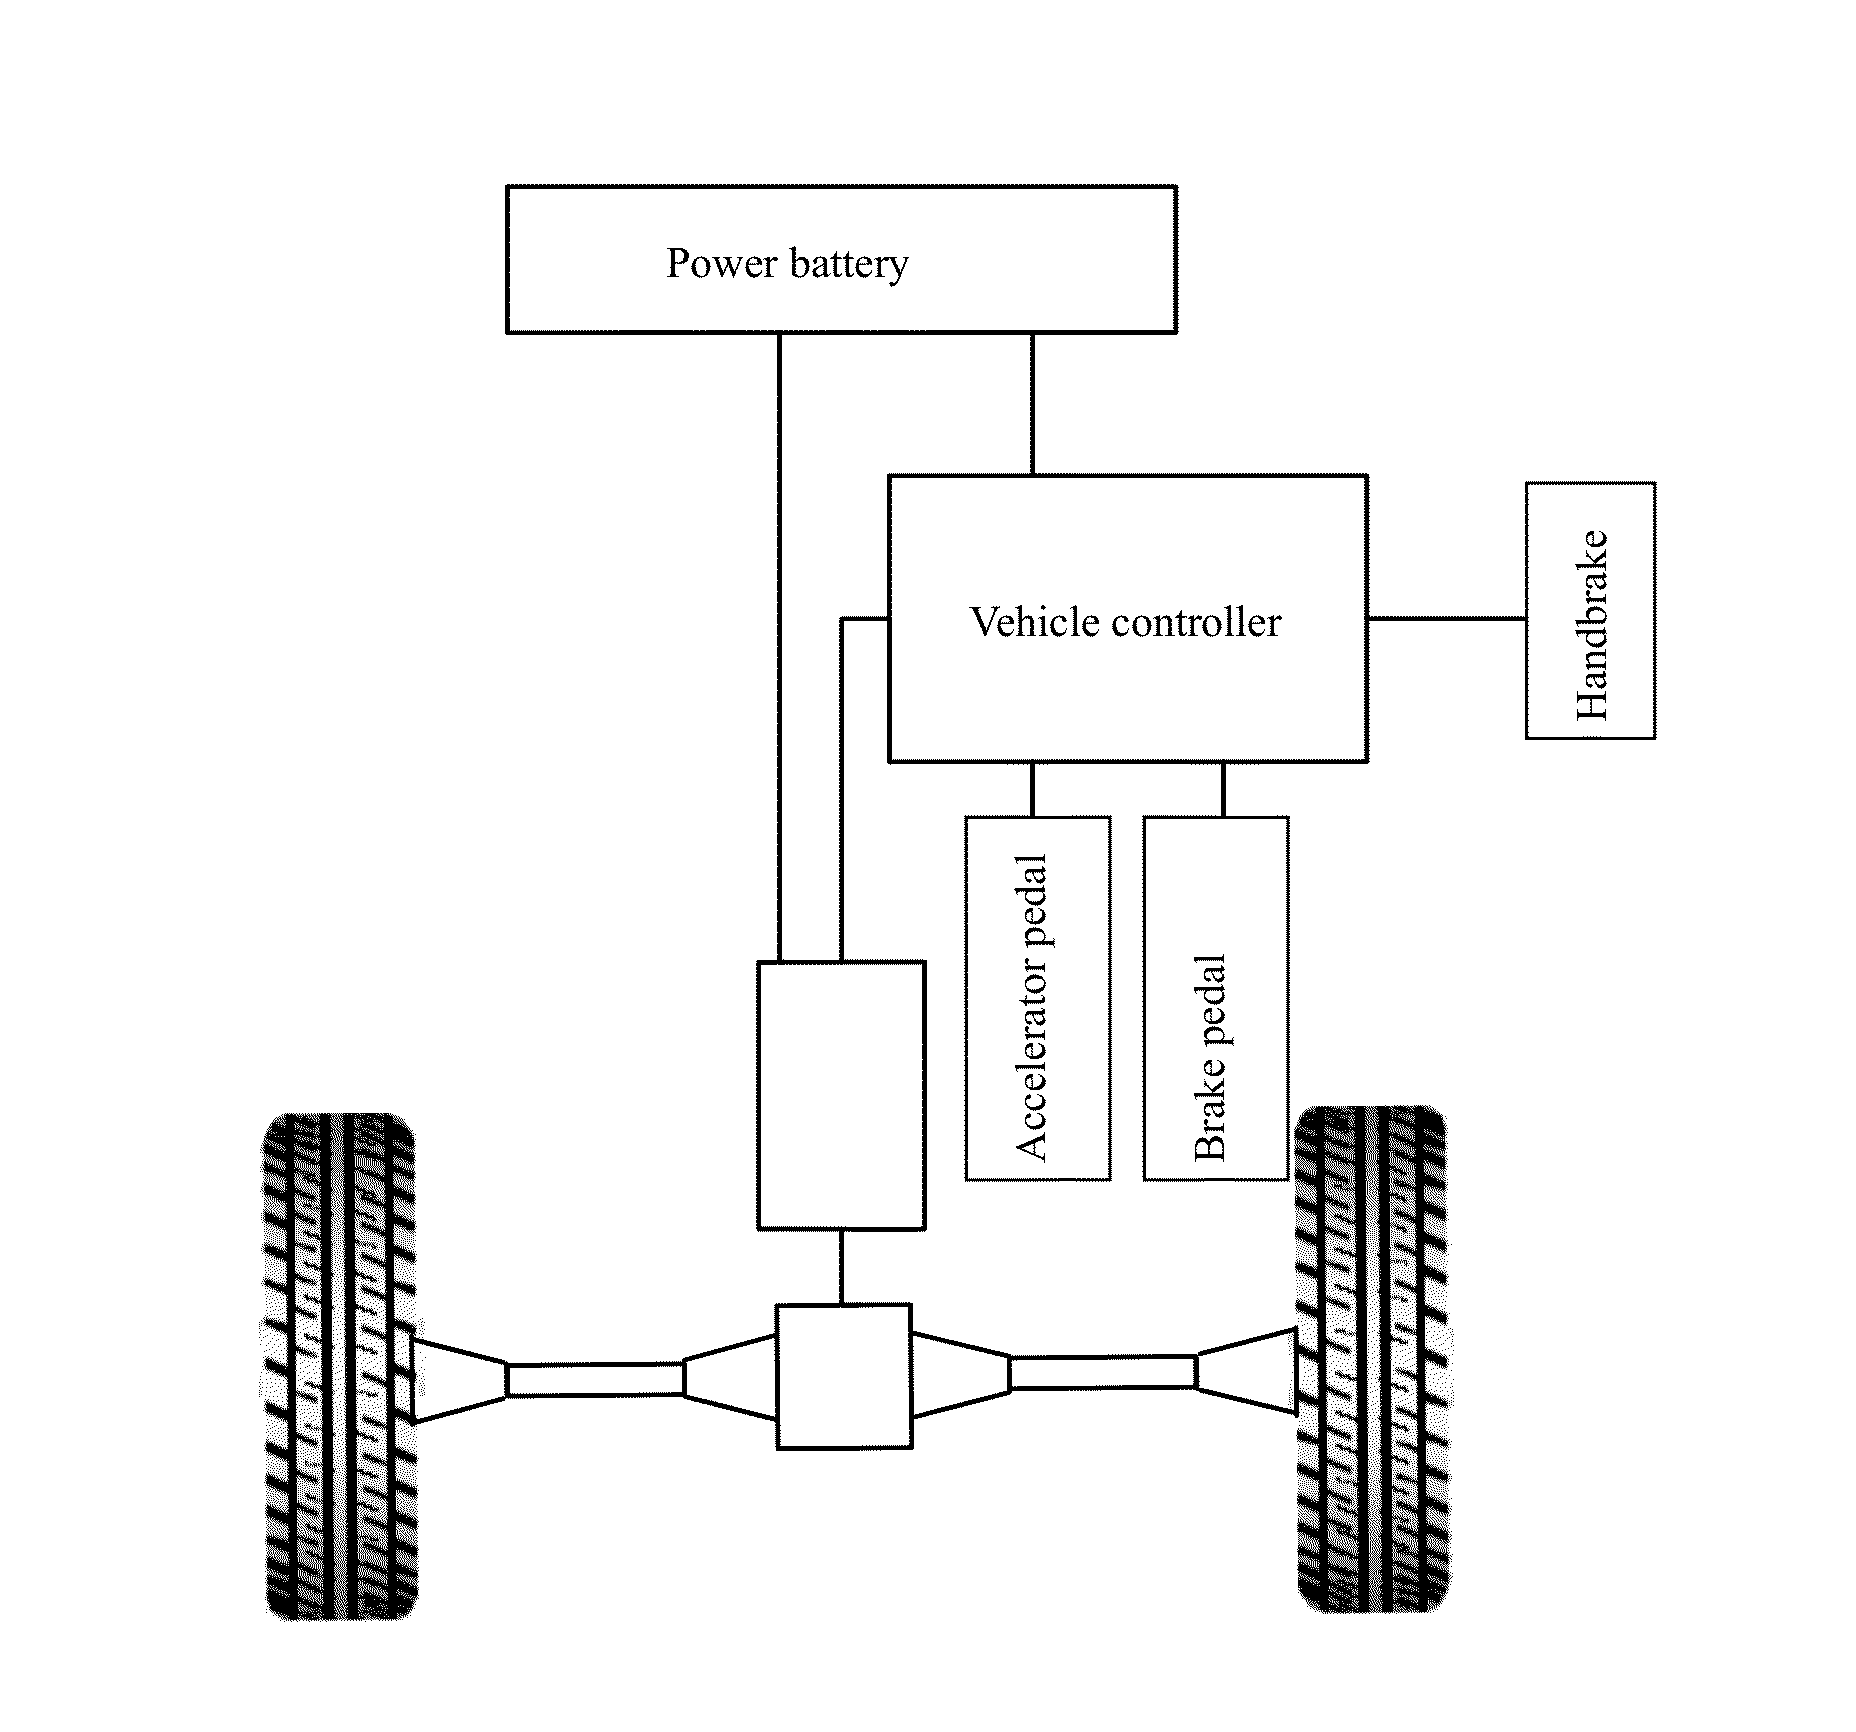 Control method for idling Anti-rollback of pure electric vehicle